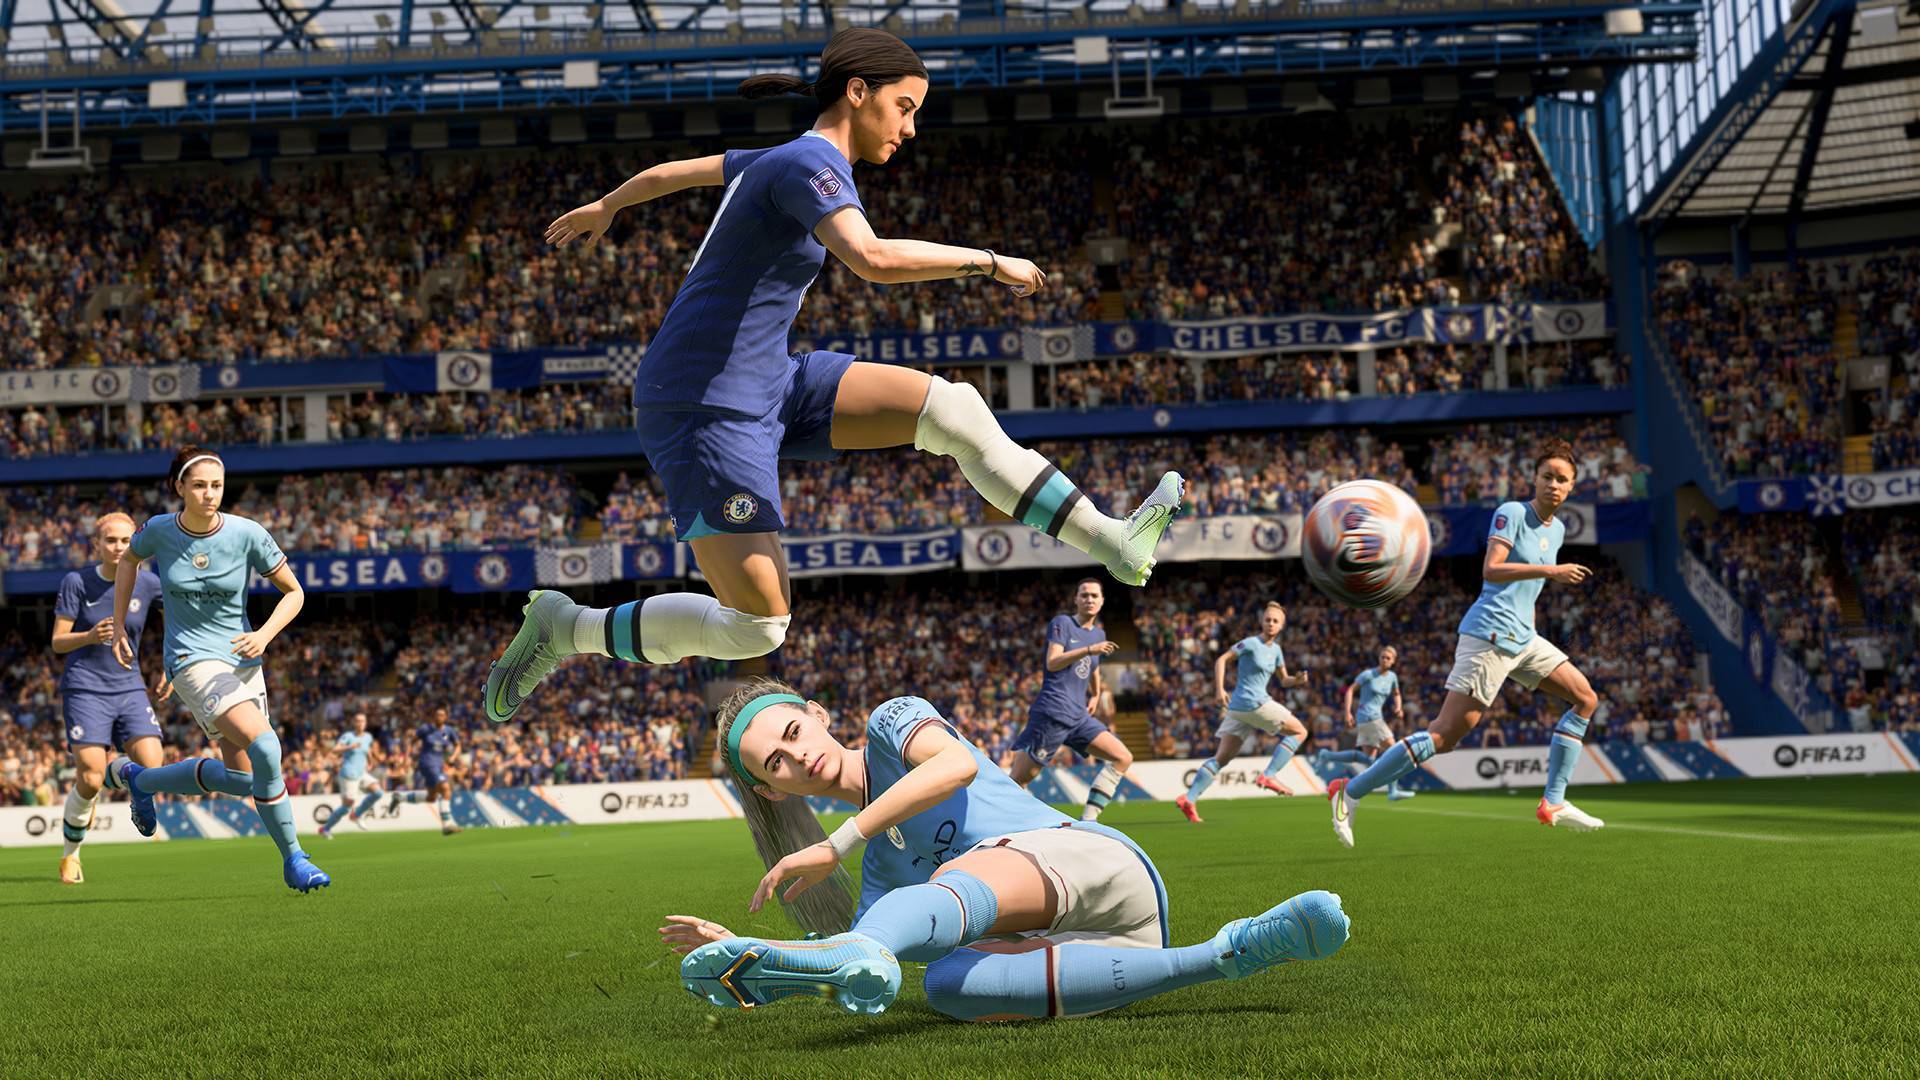 FIFA 23 (PS4) cheap - Price of $13.92